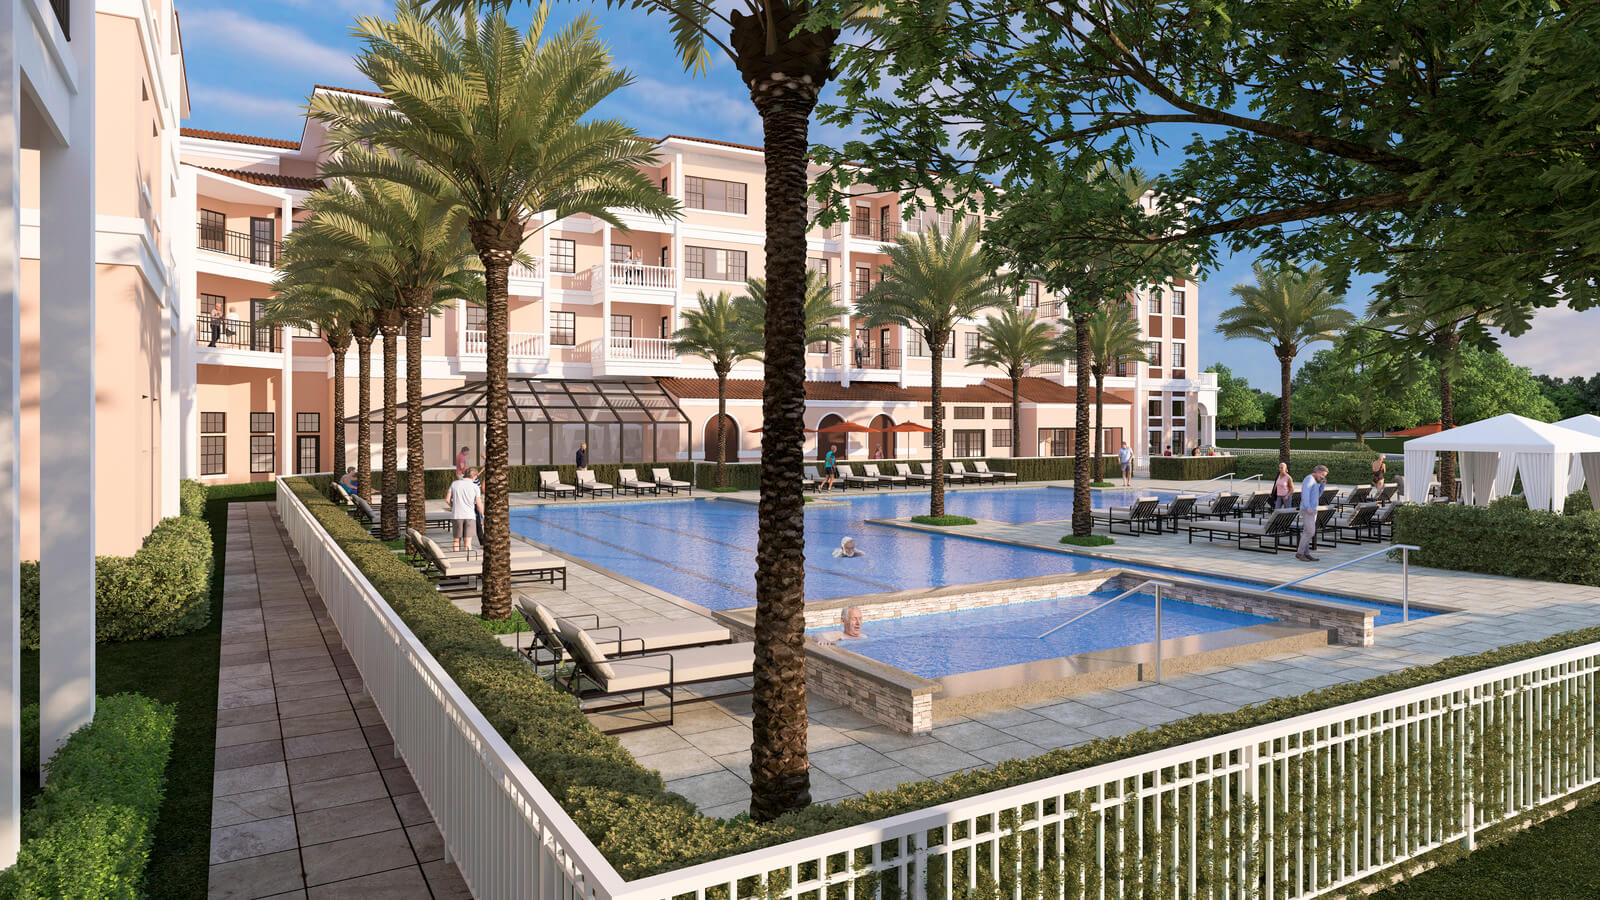 Exterior rendering of a pool with people around it